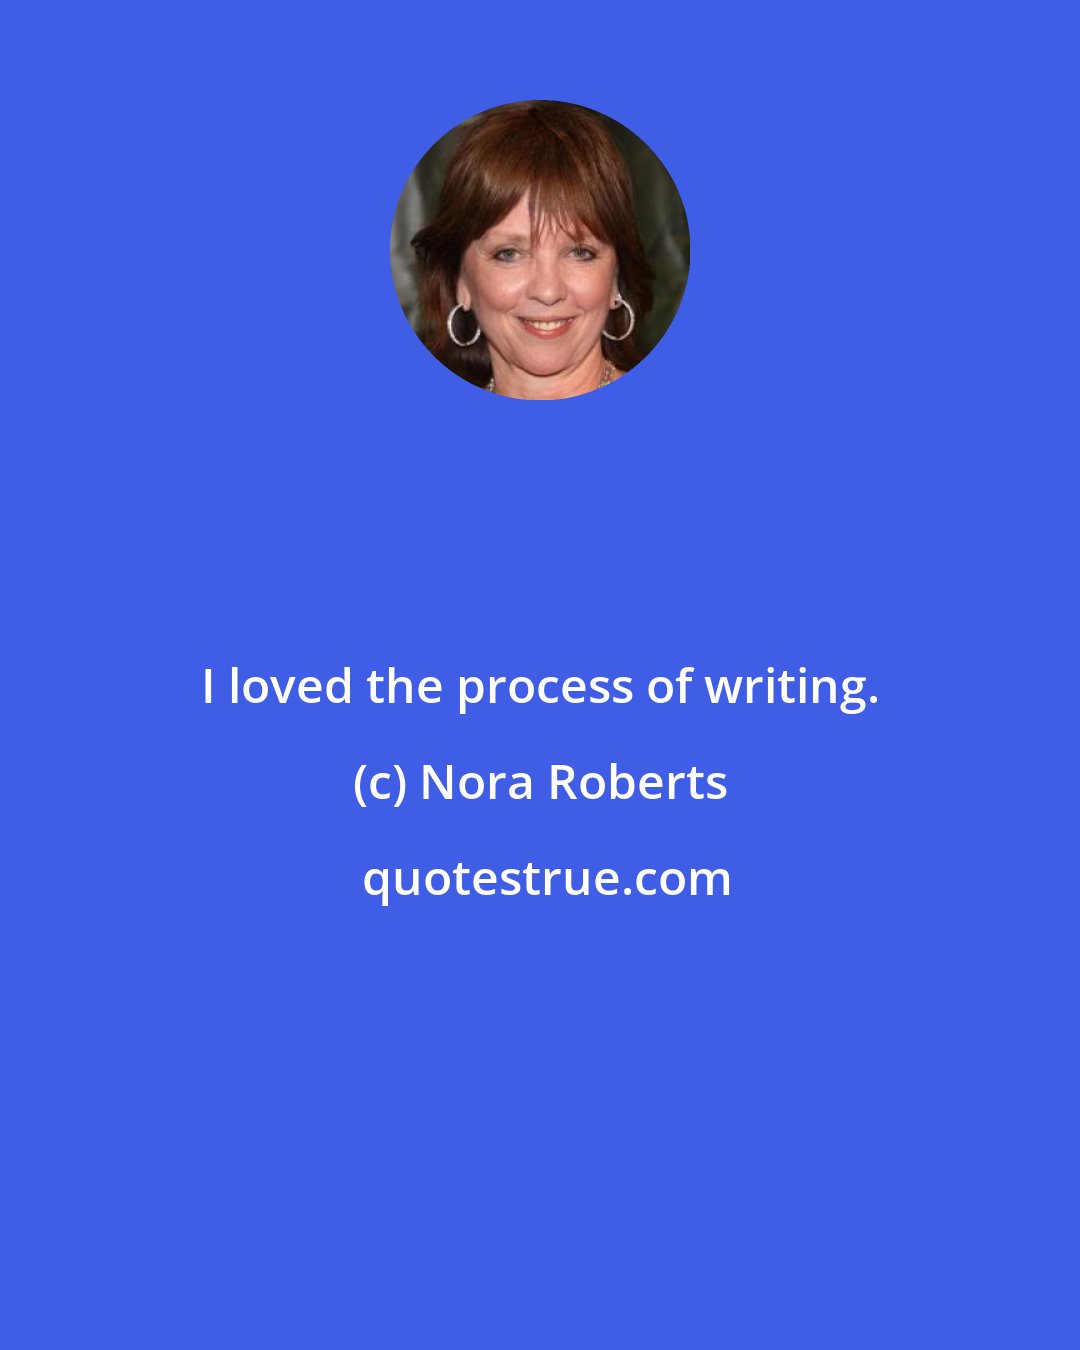 Nora Roberts: I loved the process of writing.